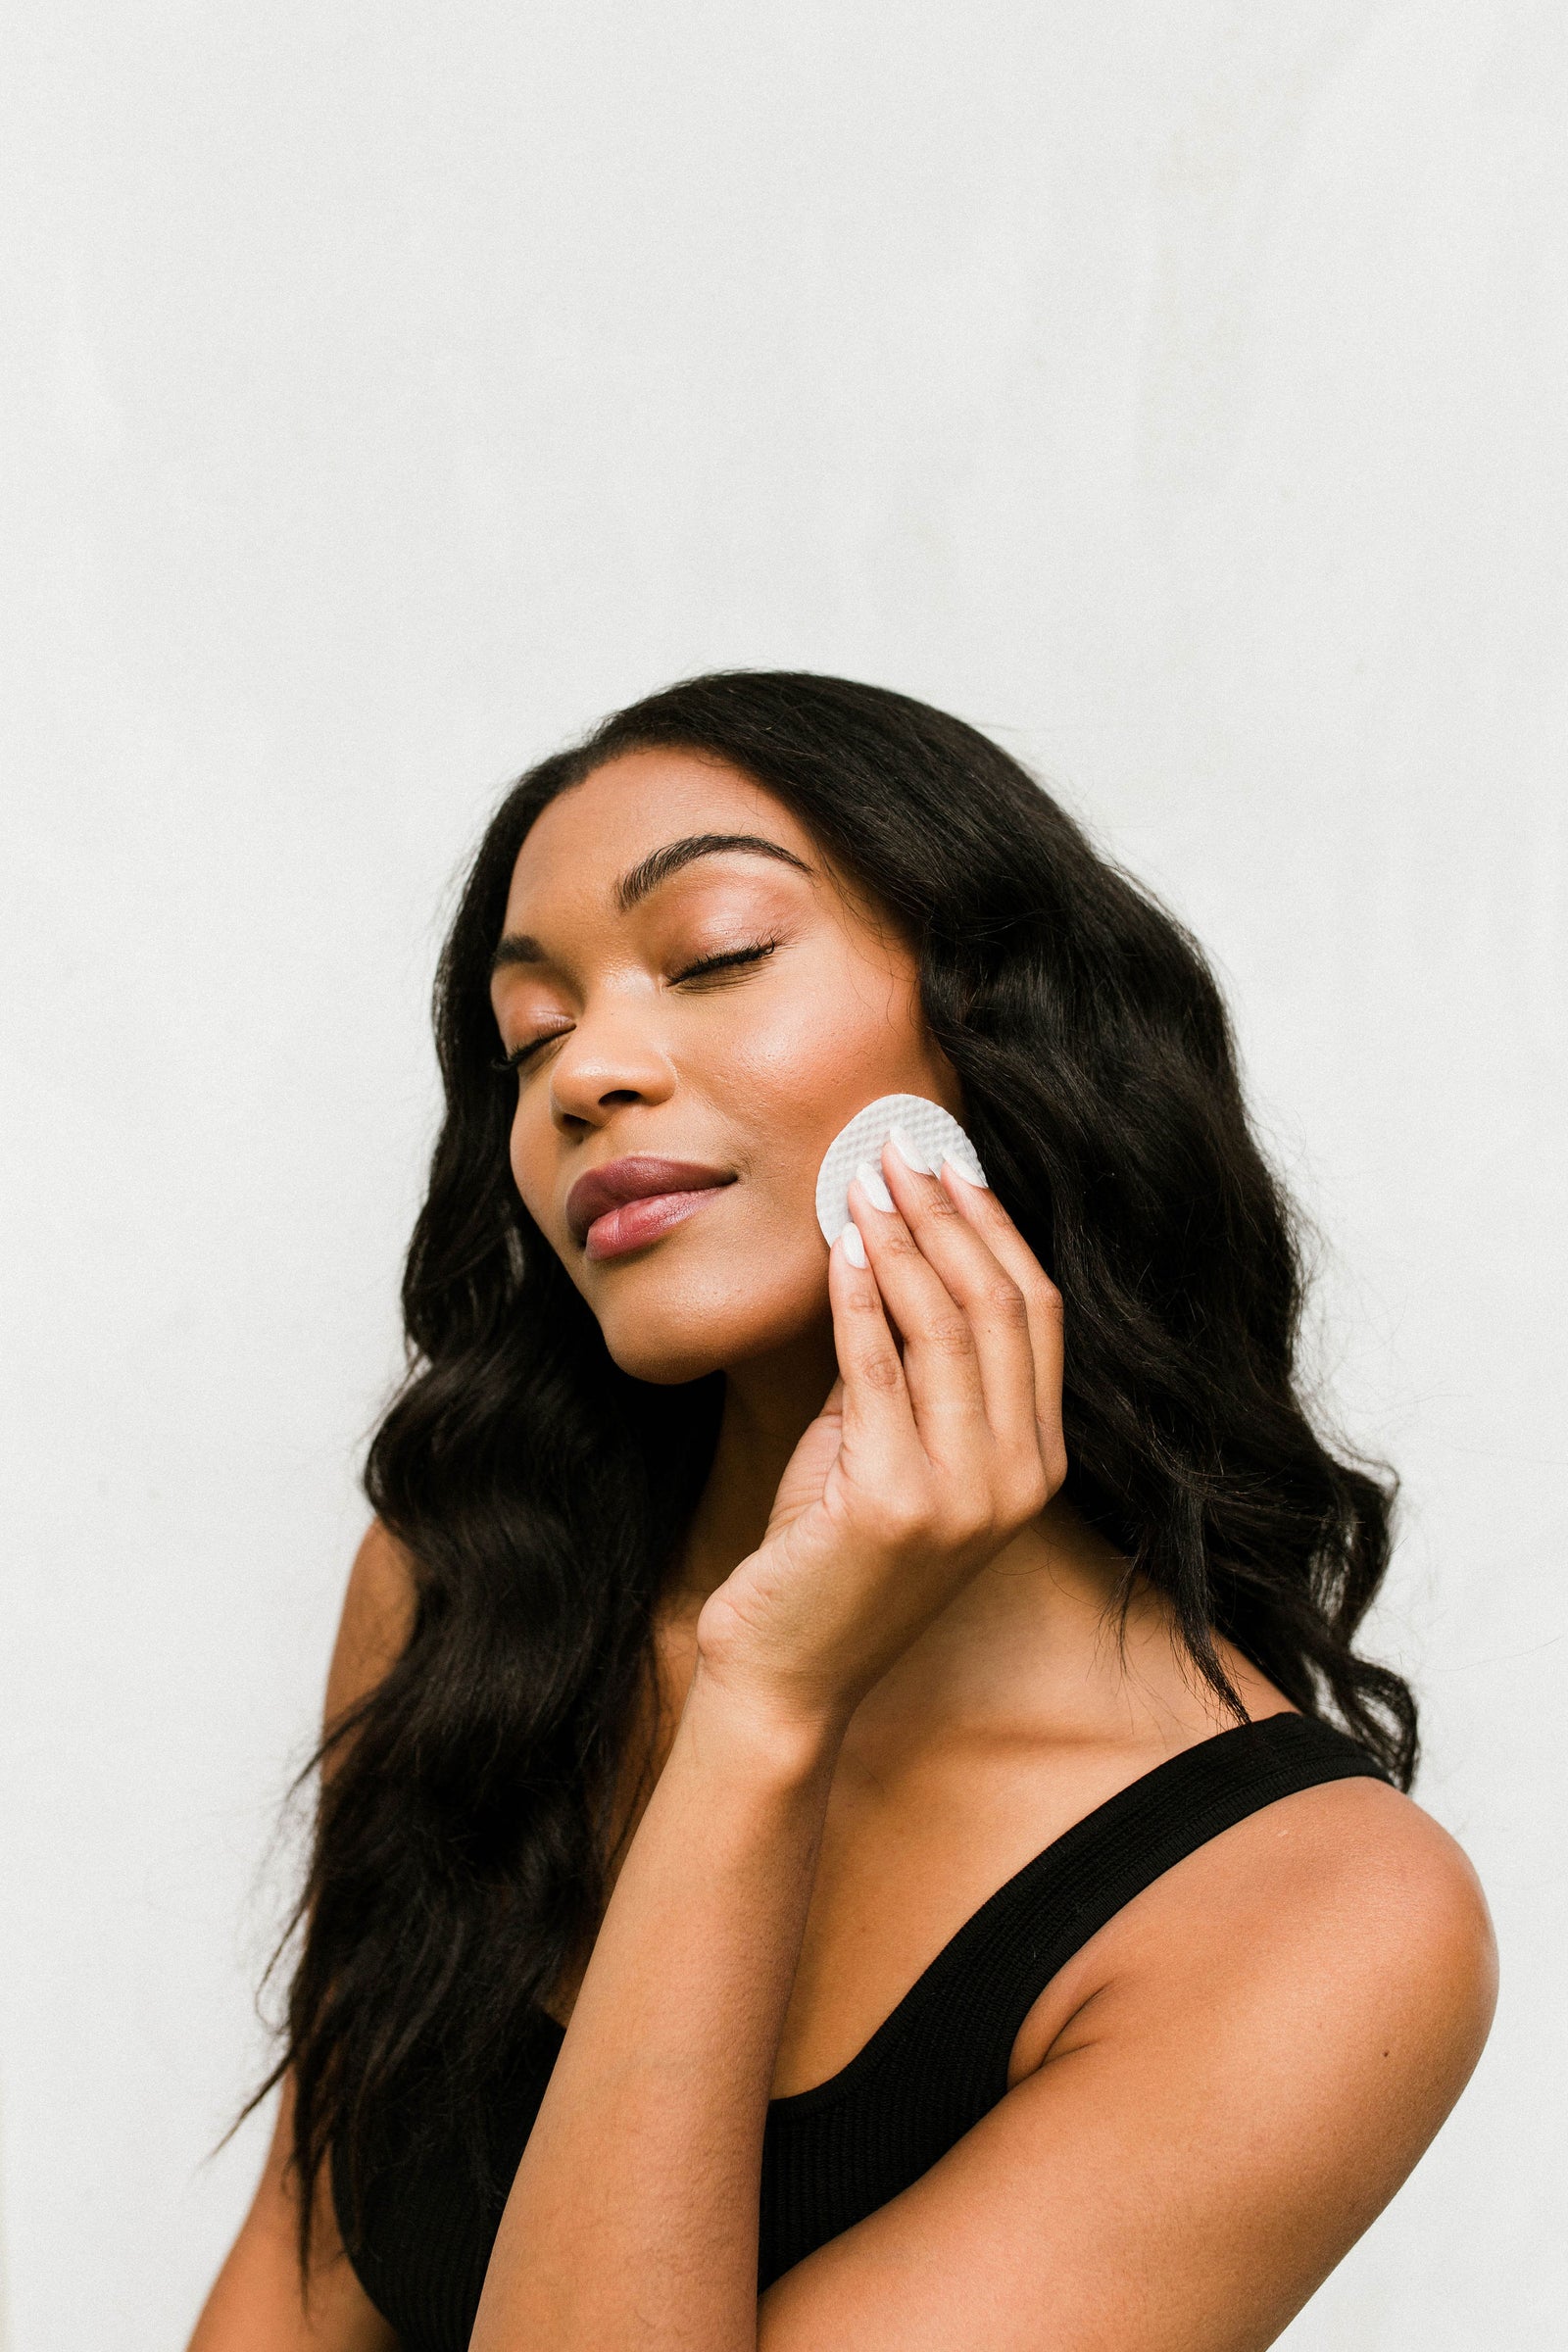 Glycolic Acid vs. Salicylic Acid: Which Is Better for You?